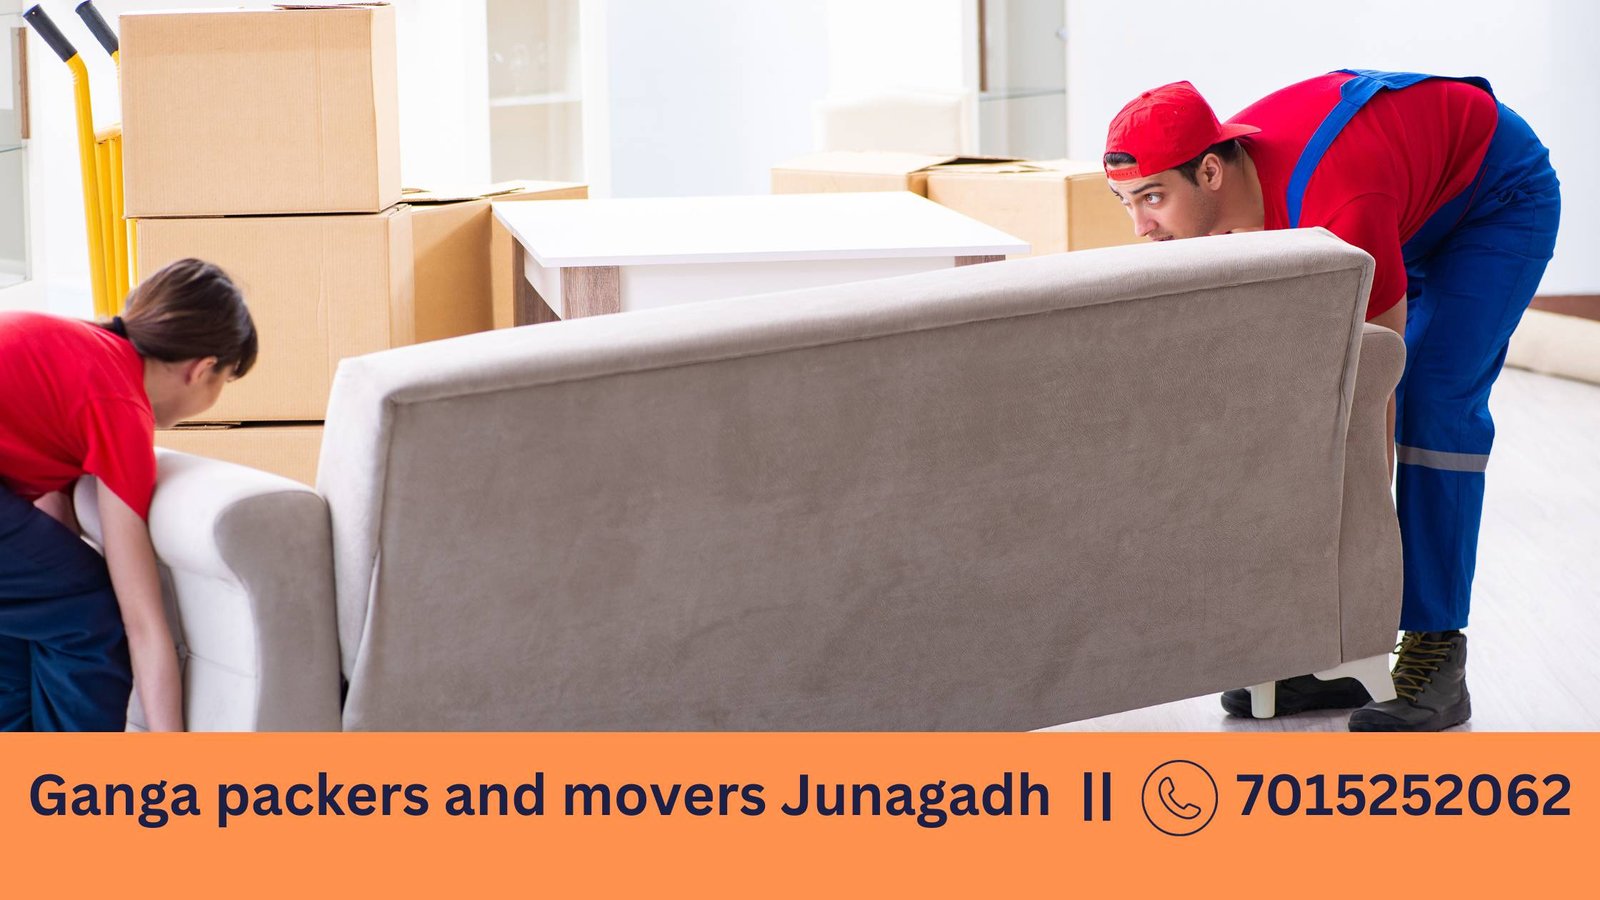 packers and movers junagadh